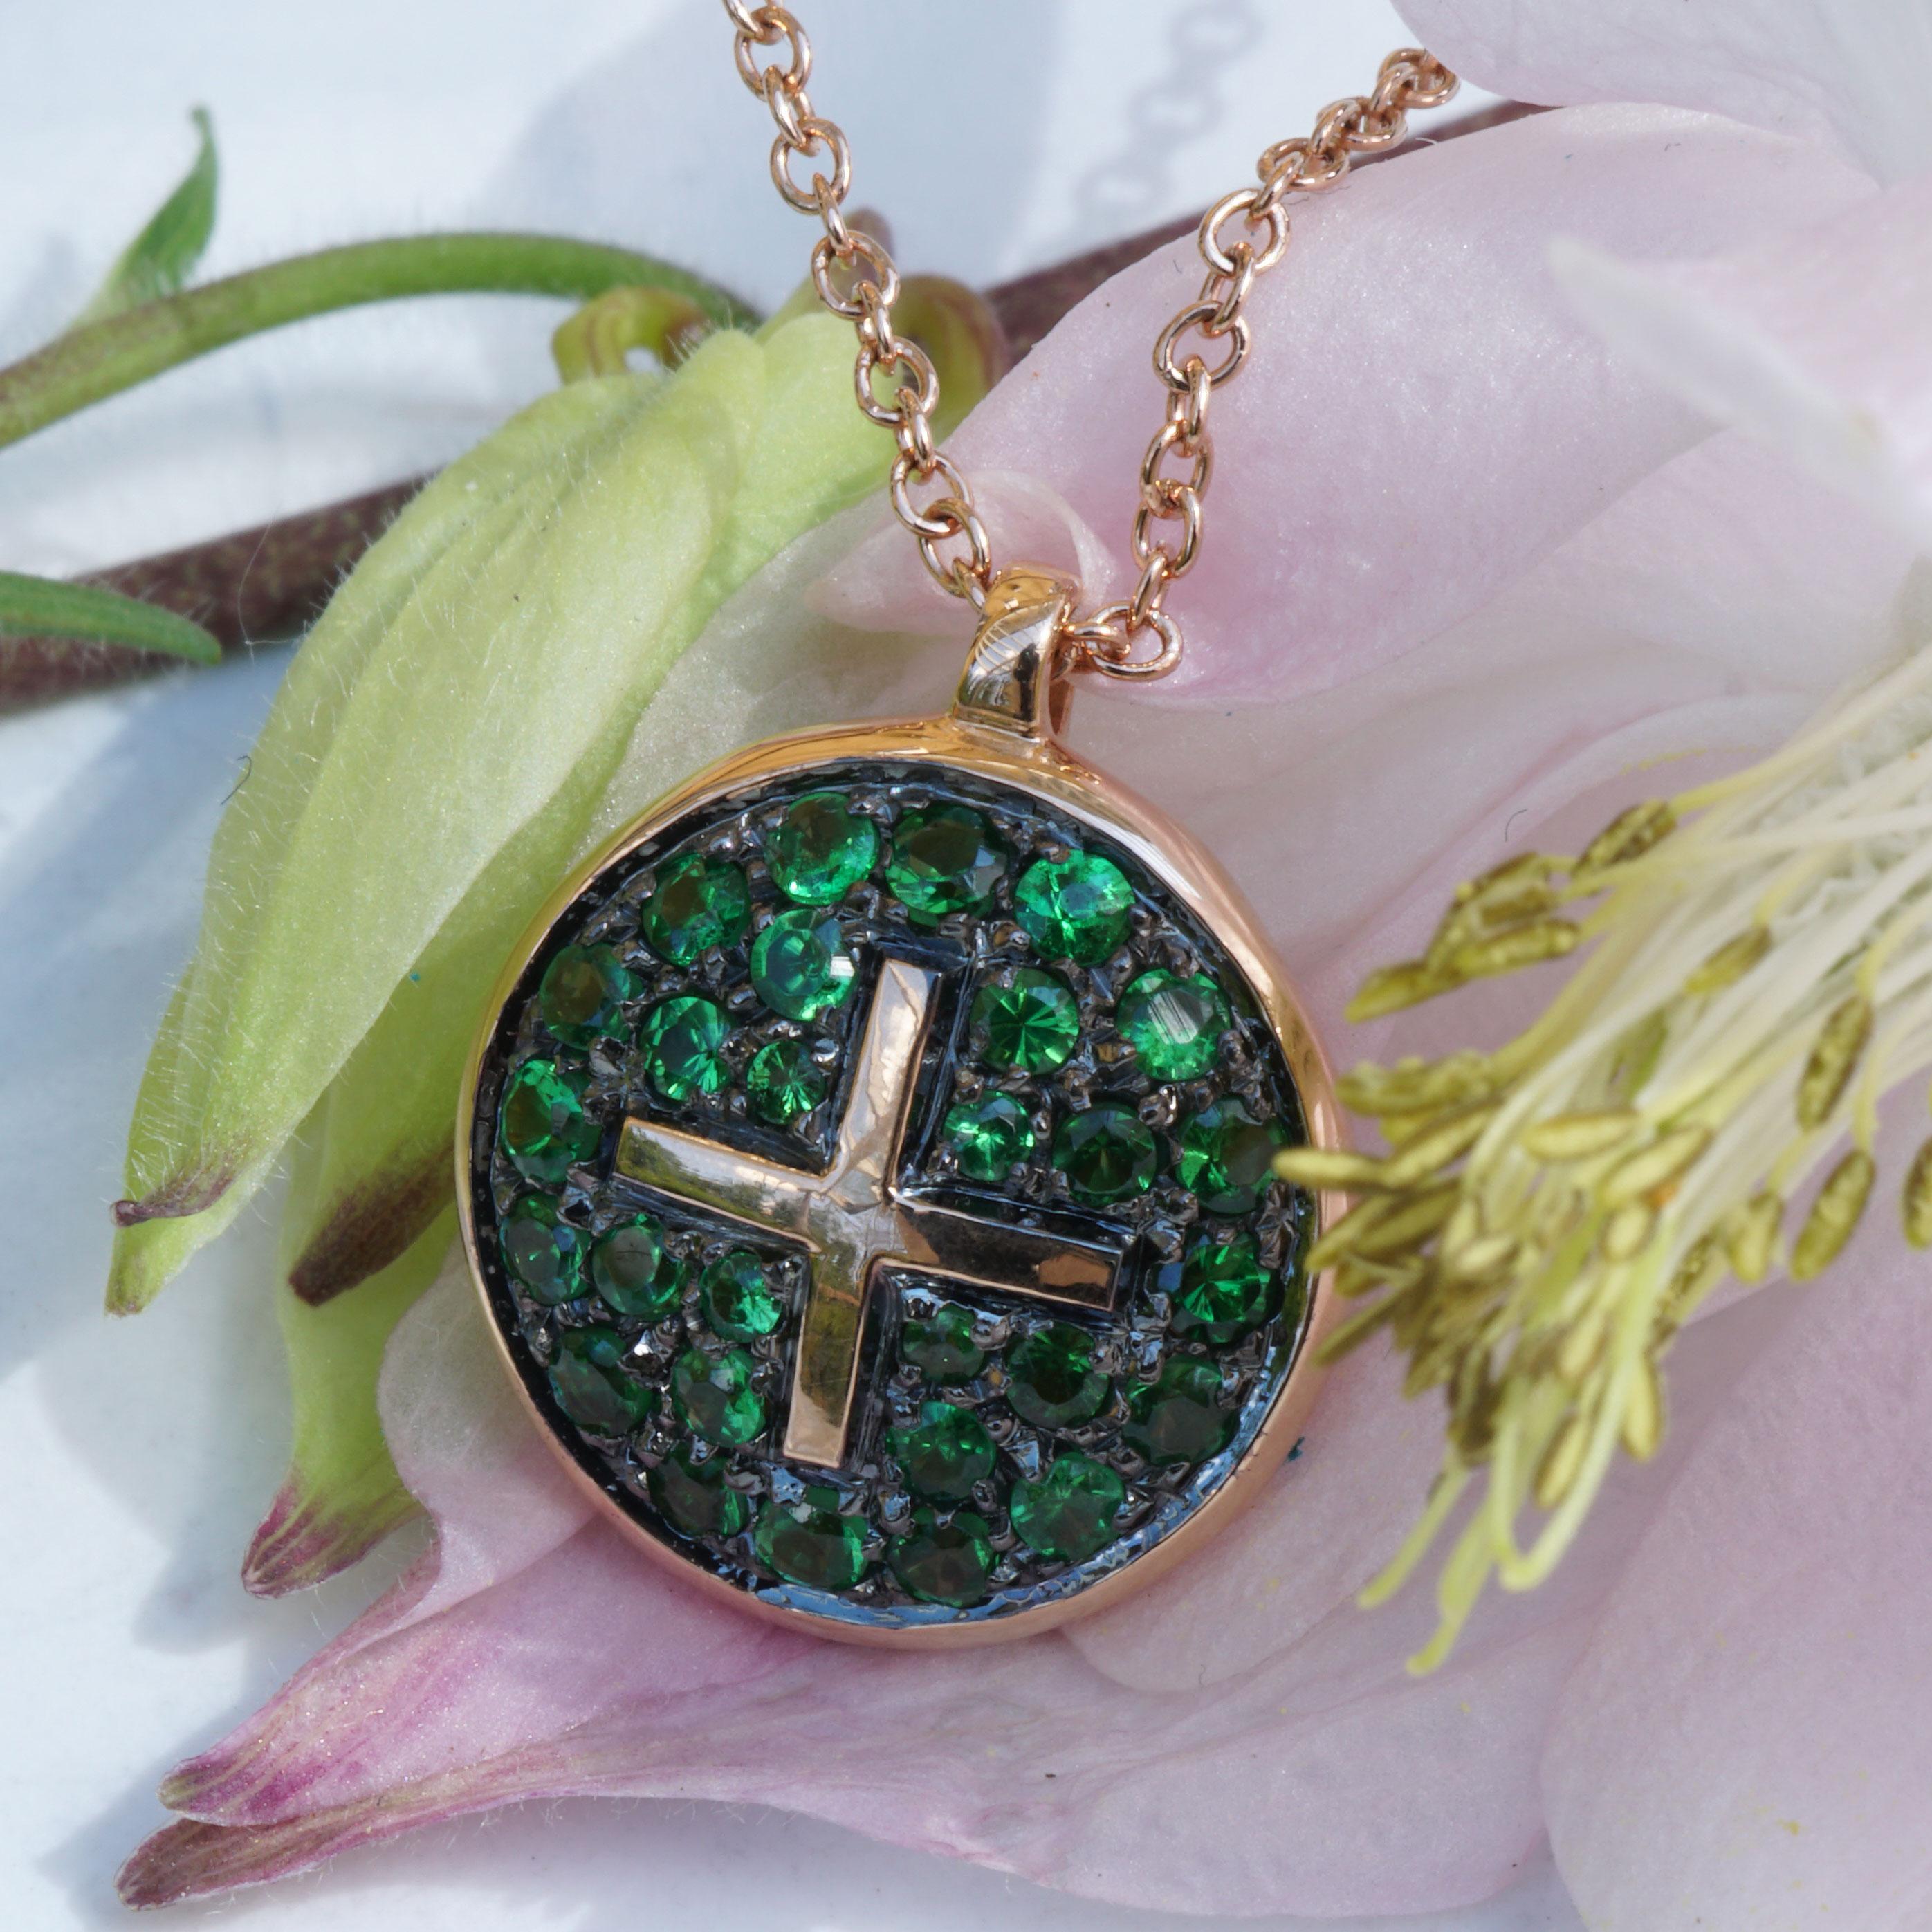 super cool made by traditional goldsmiths, made in Valenza, the small traditional Italian company takes care of all our high-quality goldsmith work, craftsmanship that convinces!, tsavorite cross pendant with chain 750 rose gold, round facetted